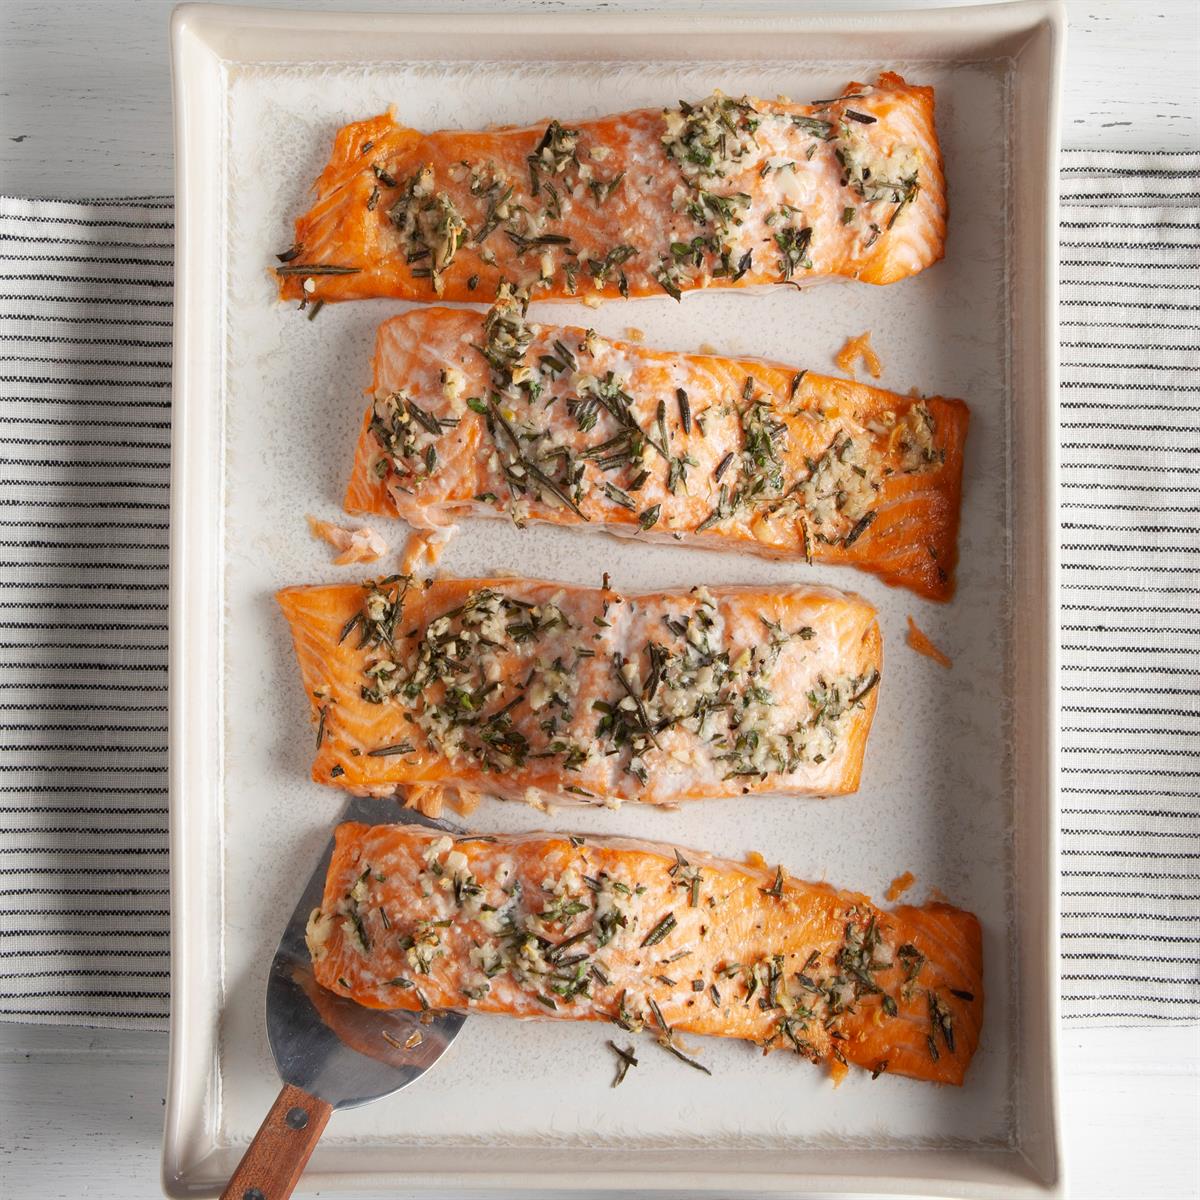 How To Cook Salmon In The Oven